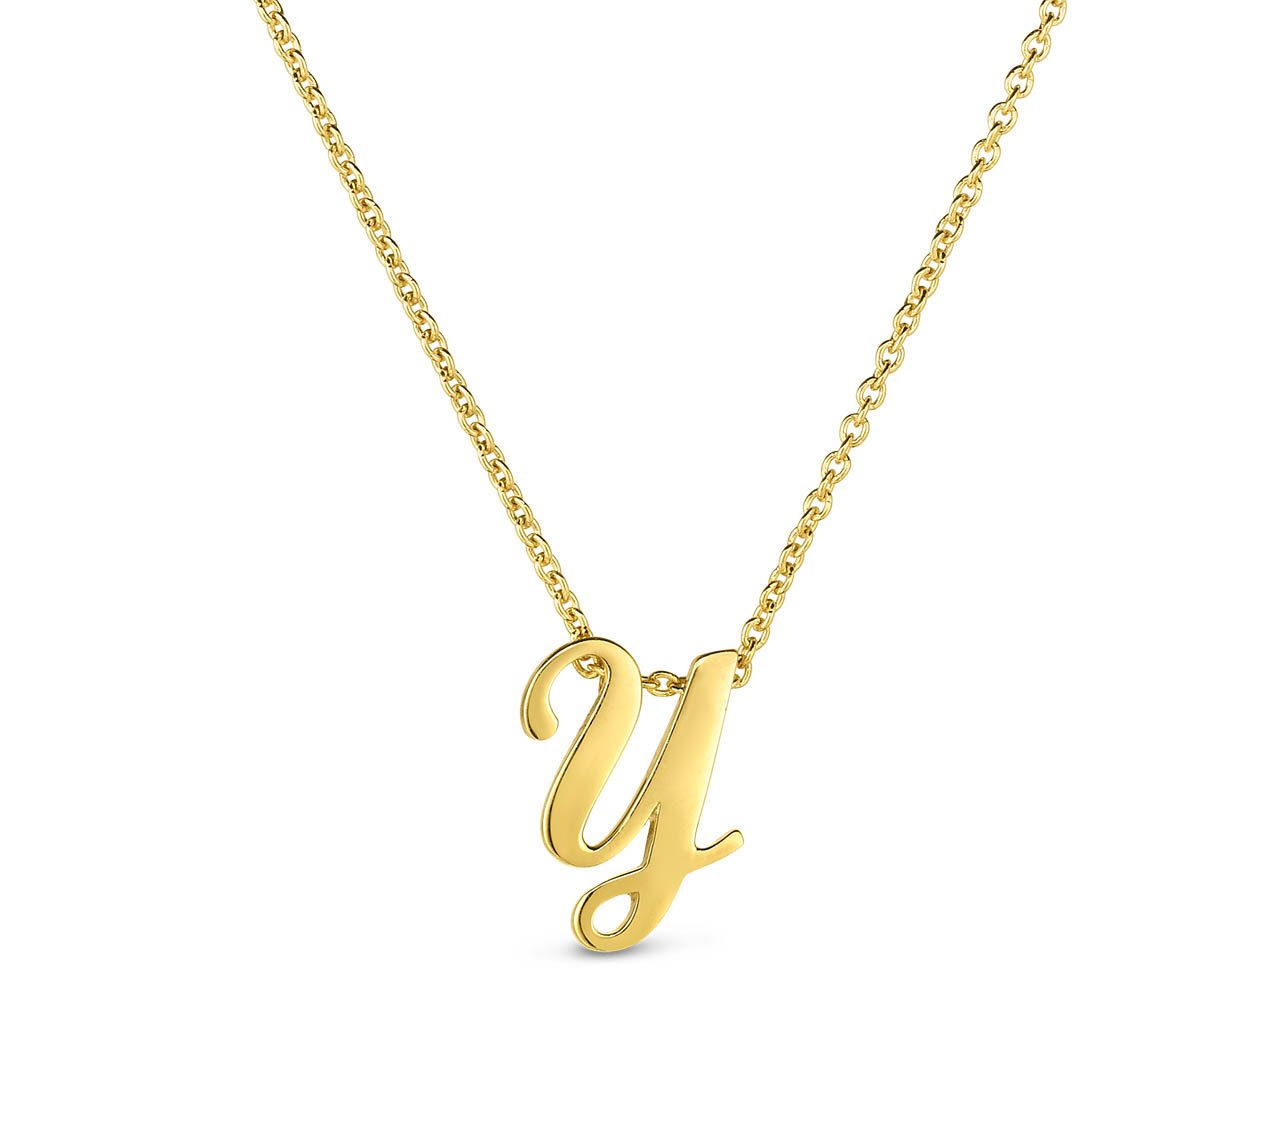 Roberto Coin "Tiny Treasures" Small Script Initial ‘Y’ Pendant On Chain